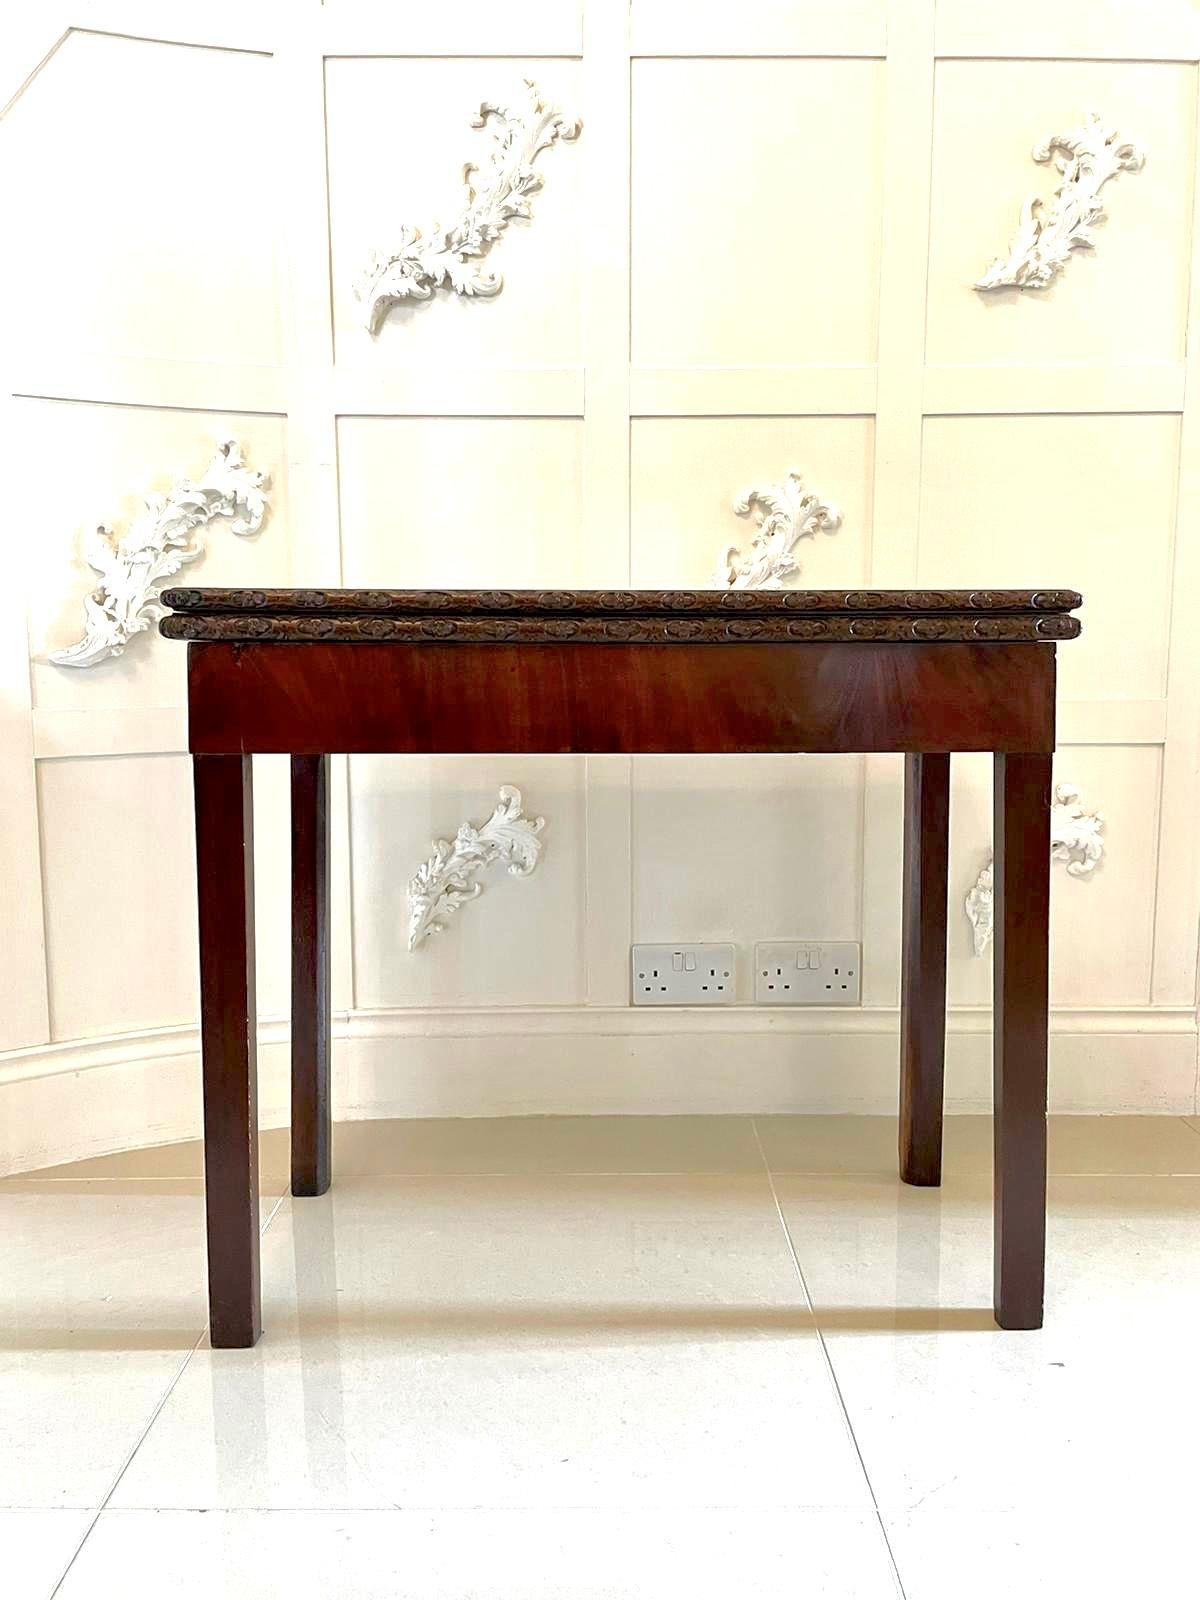 18th century George III antique Chippendale mahogany carved card/side table having a lovely fold over top with a charming quality carved edge opening to reveal a green baize interior. It stands on four square tapering legs.

This handsome period